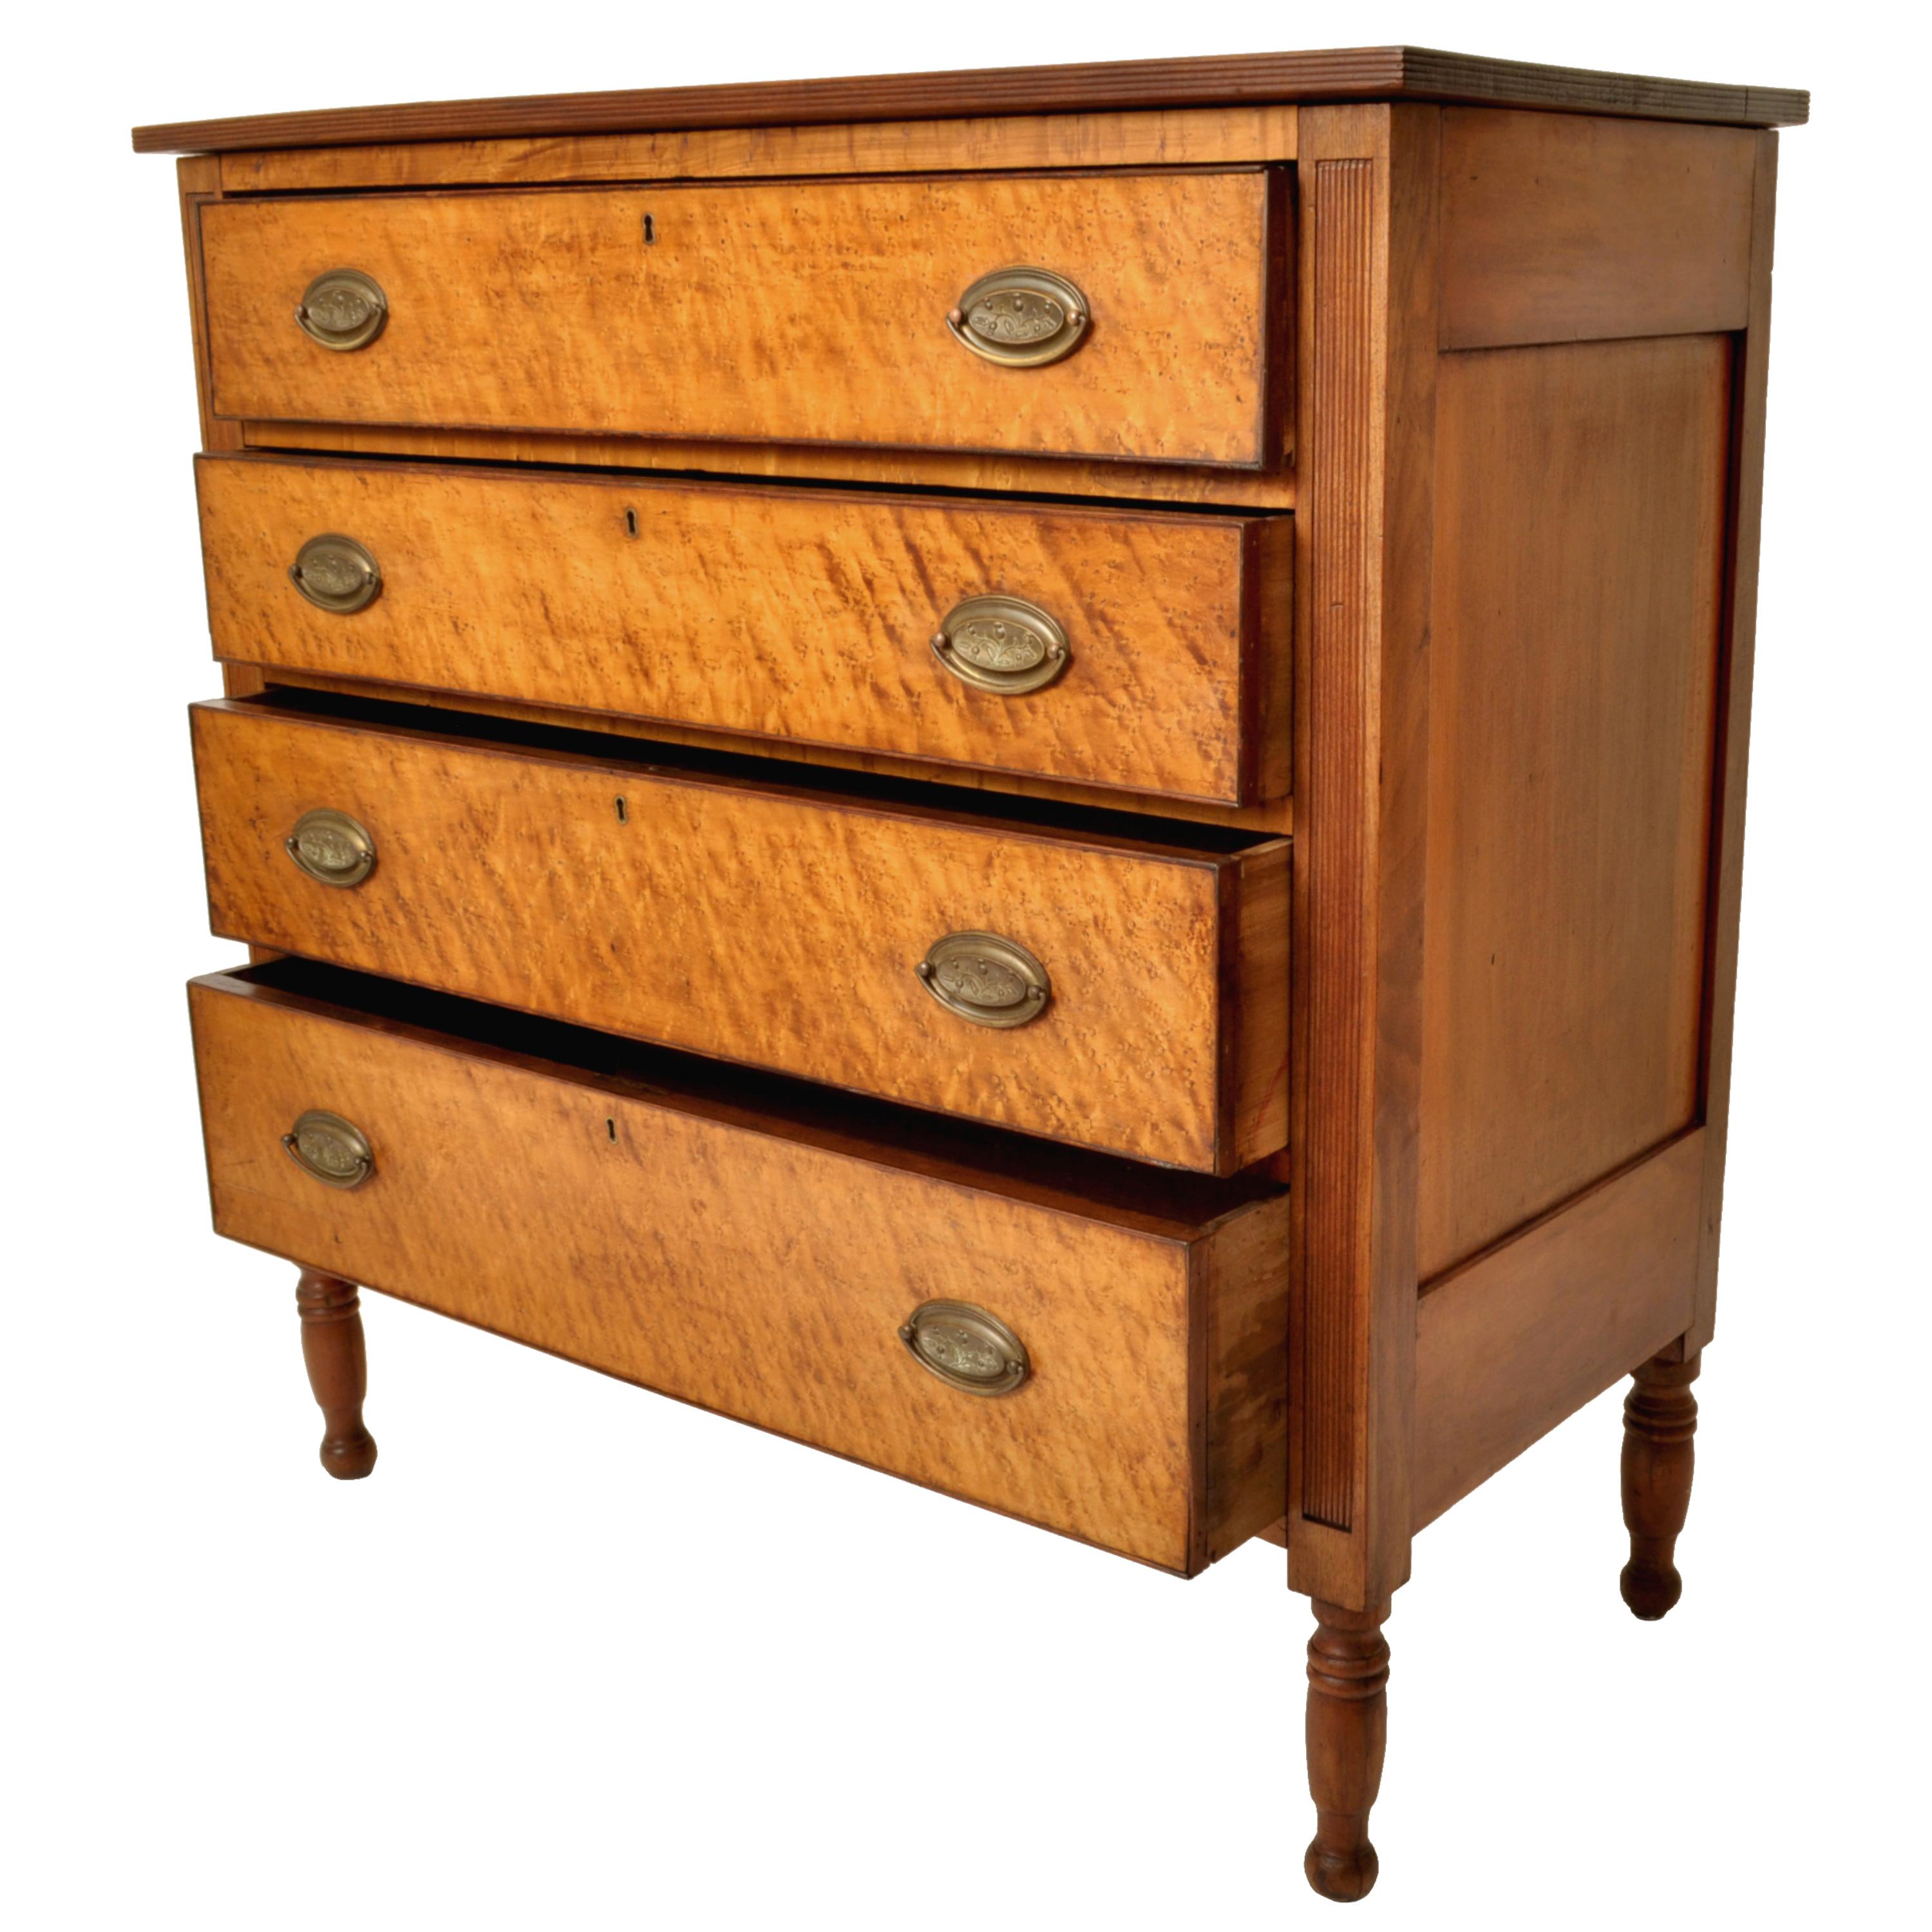 Early 19th Century Antique American New England Sheraton Cherry Maple Dresser Chest Drawers, 1825